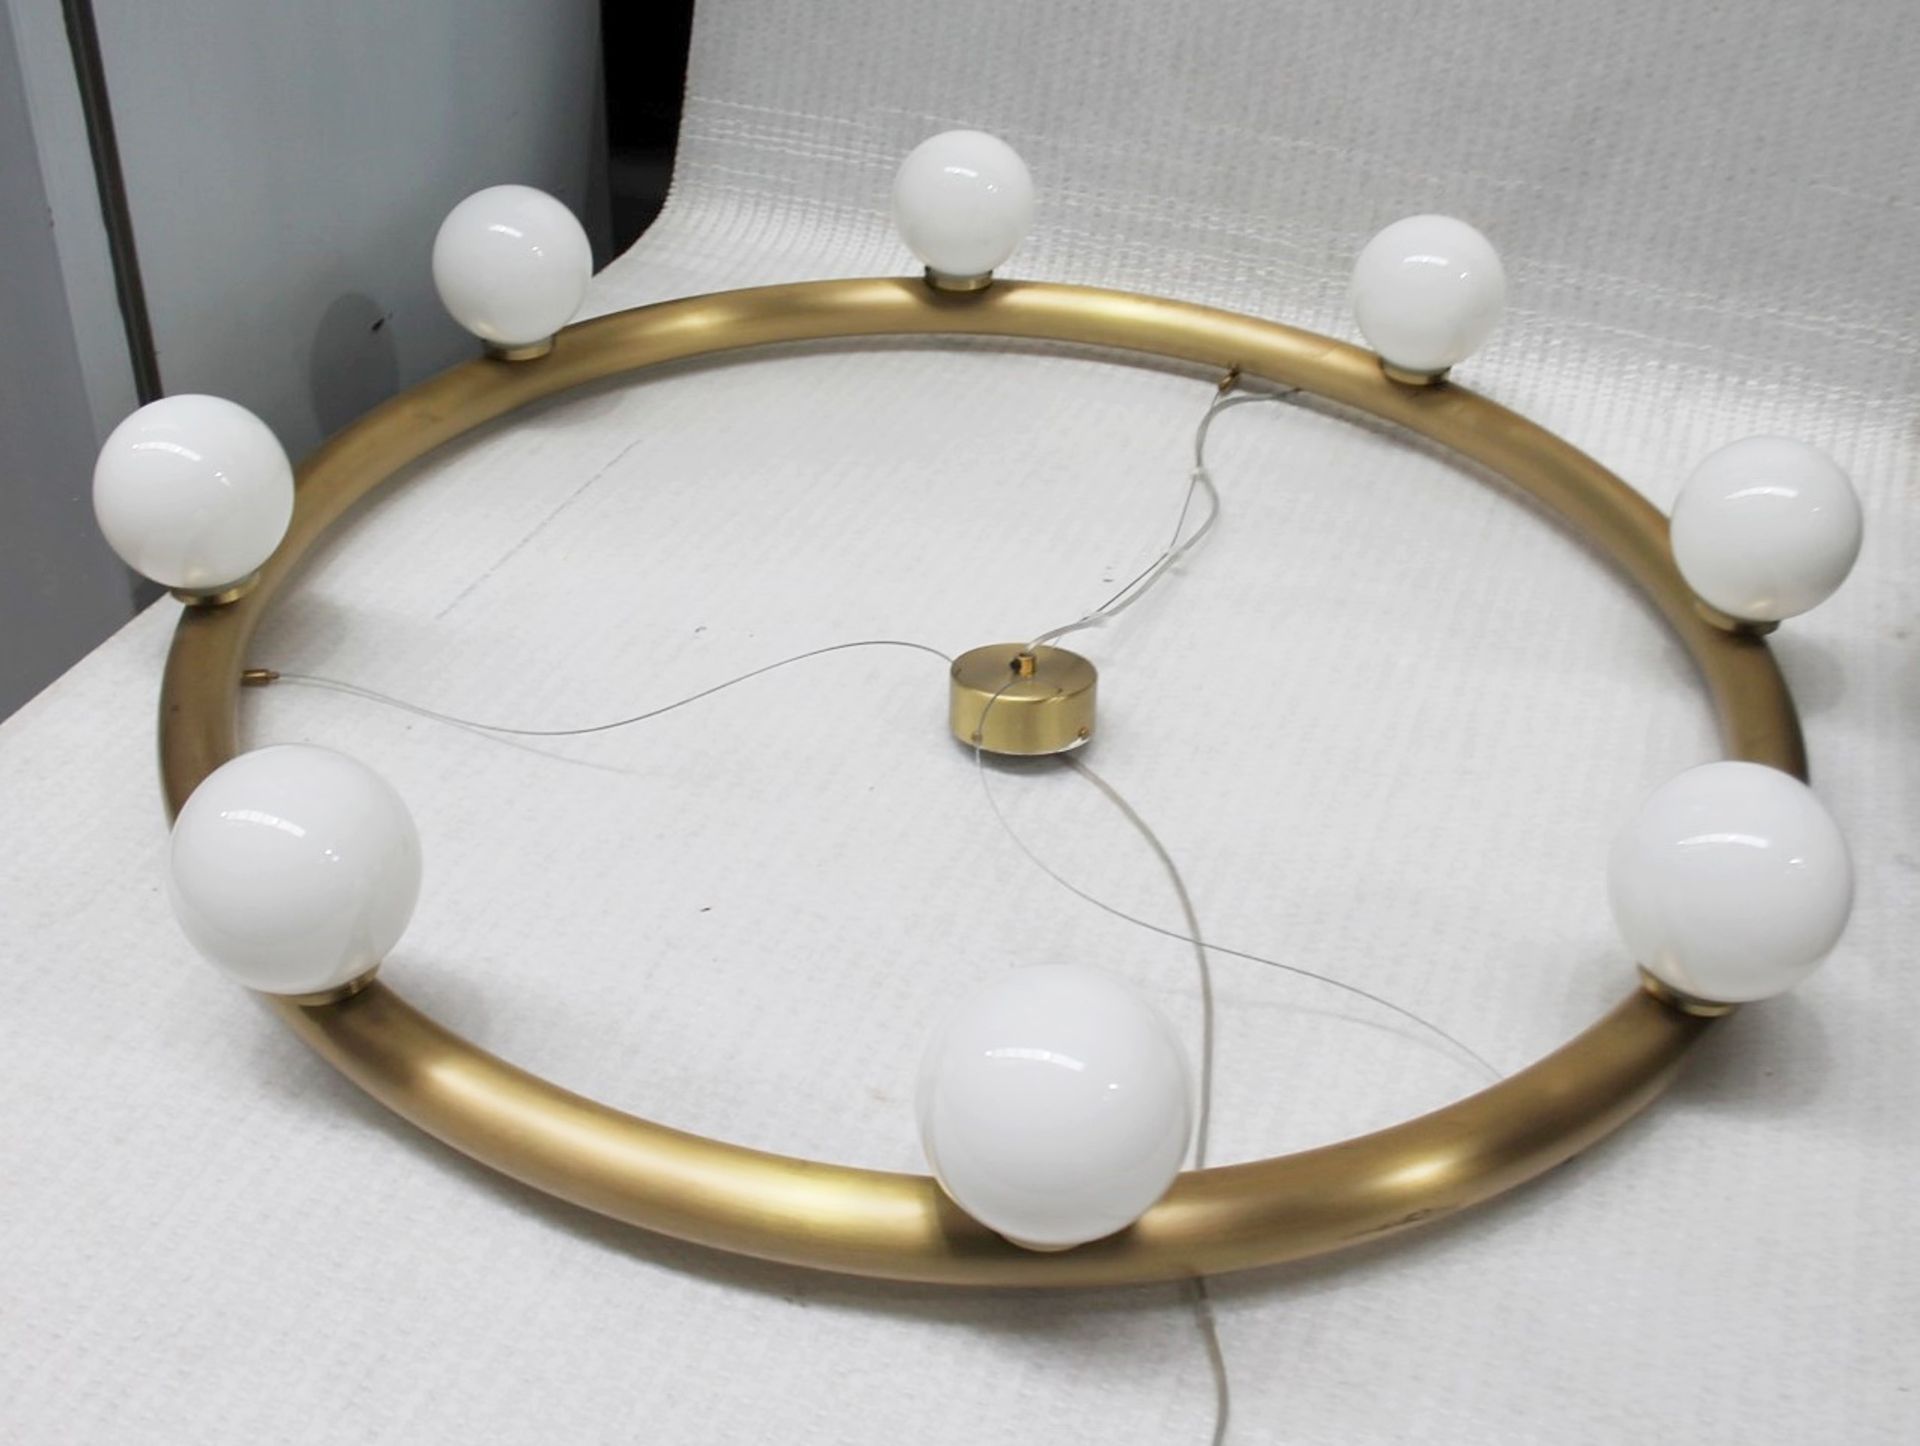 1 x Huge Luxury Statement Circular 8-Light Chandelier In Brass With Opal Shades - Price £3,540 - Image 6 of 10